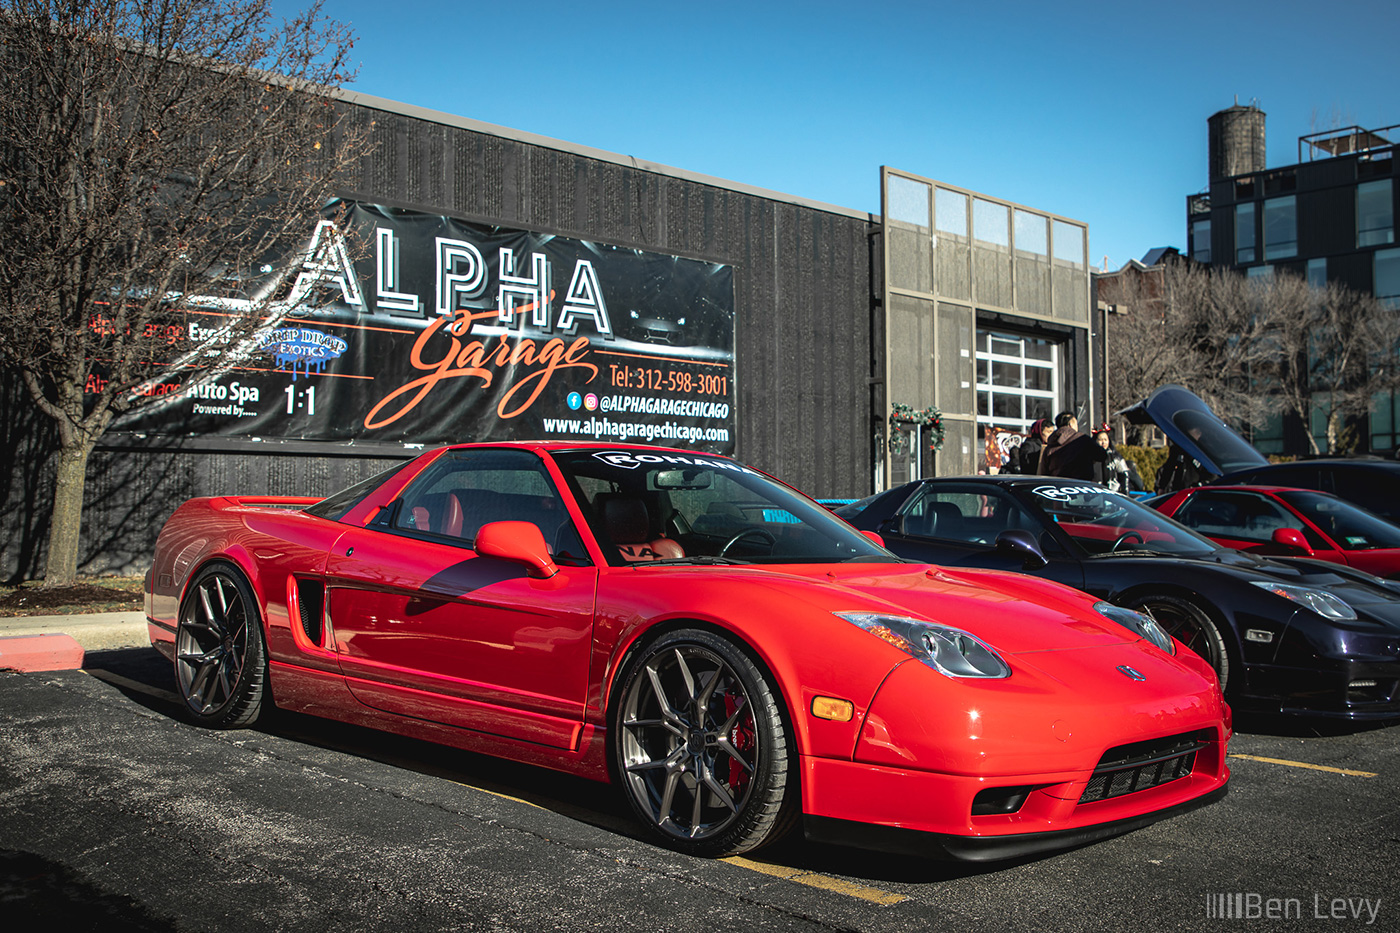 Red Acura NSX outside of Alpha Garage in Chicago